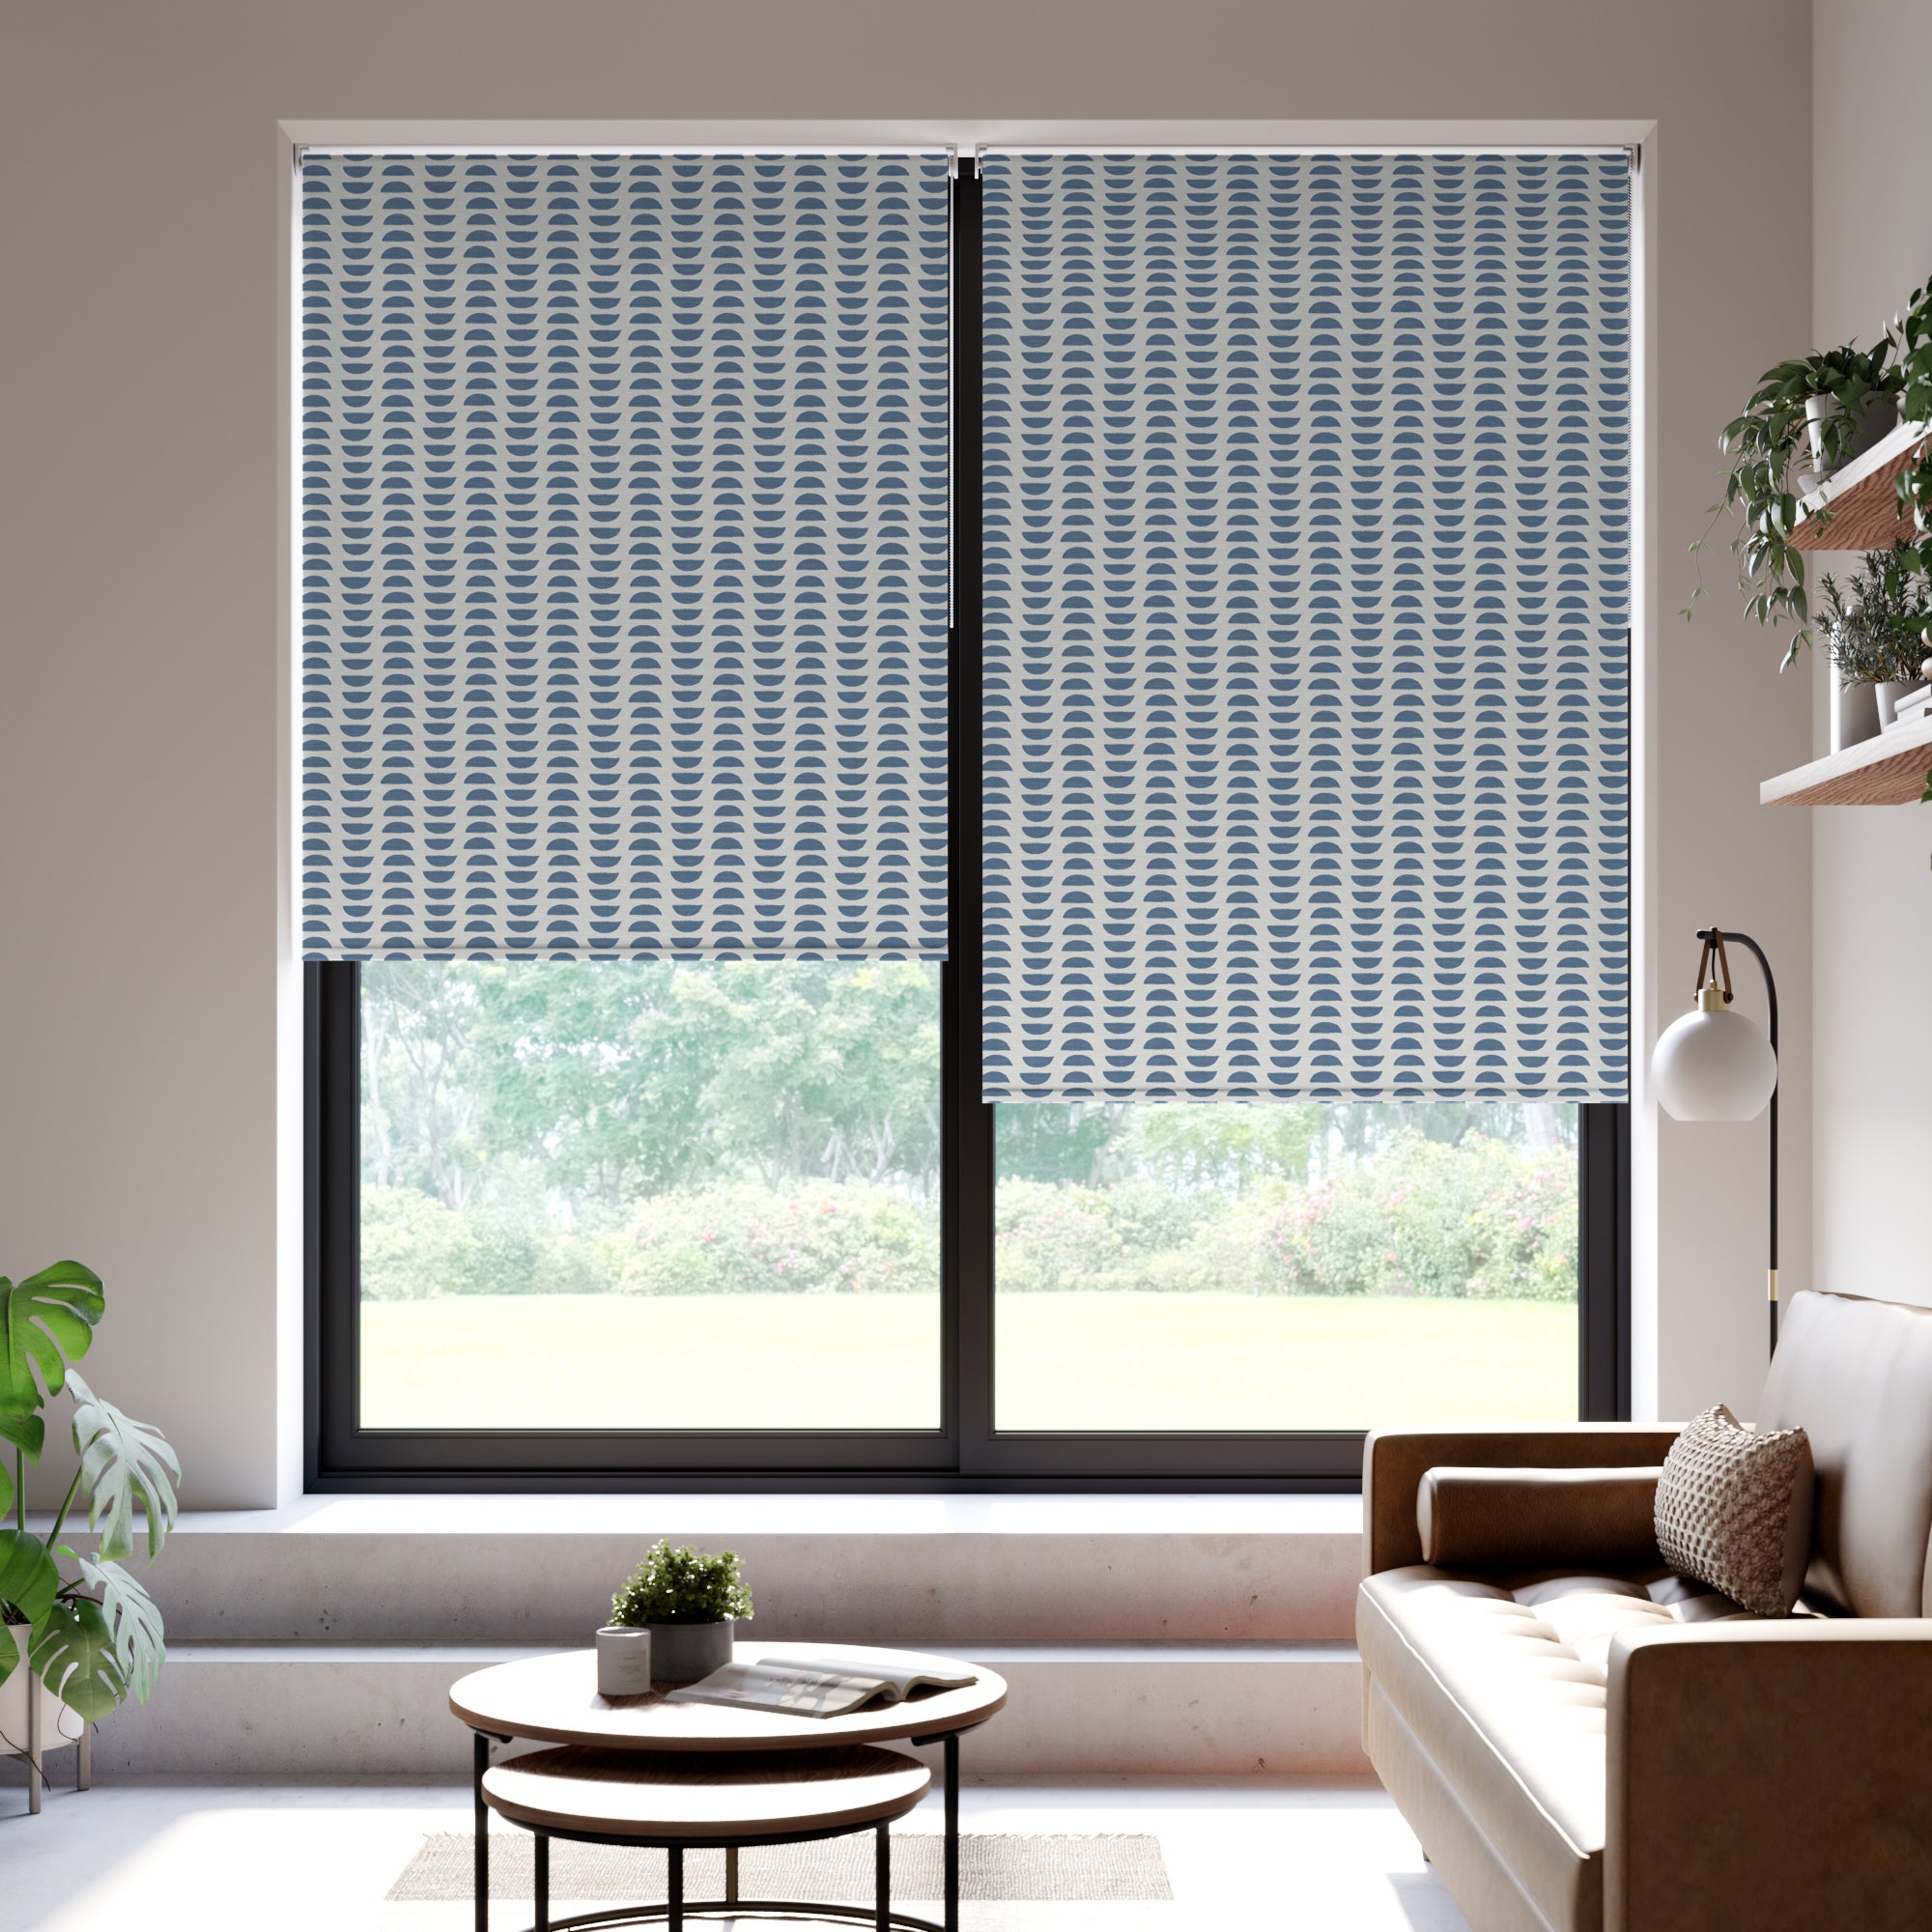 Kenzo Daylight Made to Measure Roller Blind Fabric Sample Kenzo Midnight